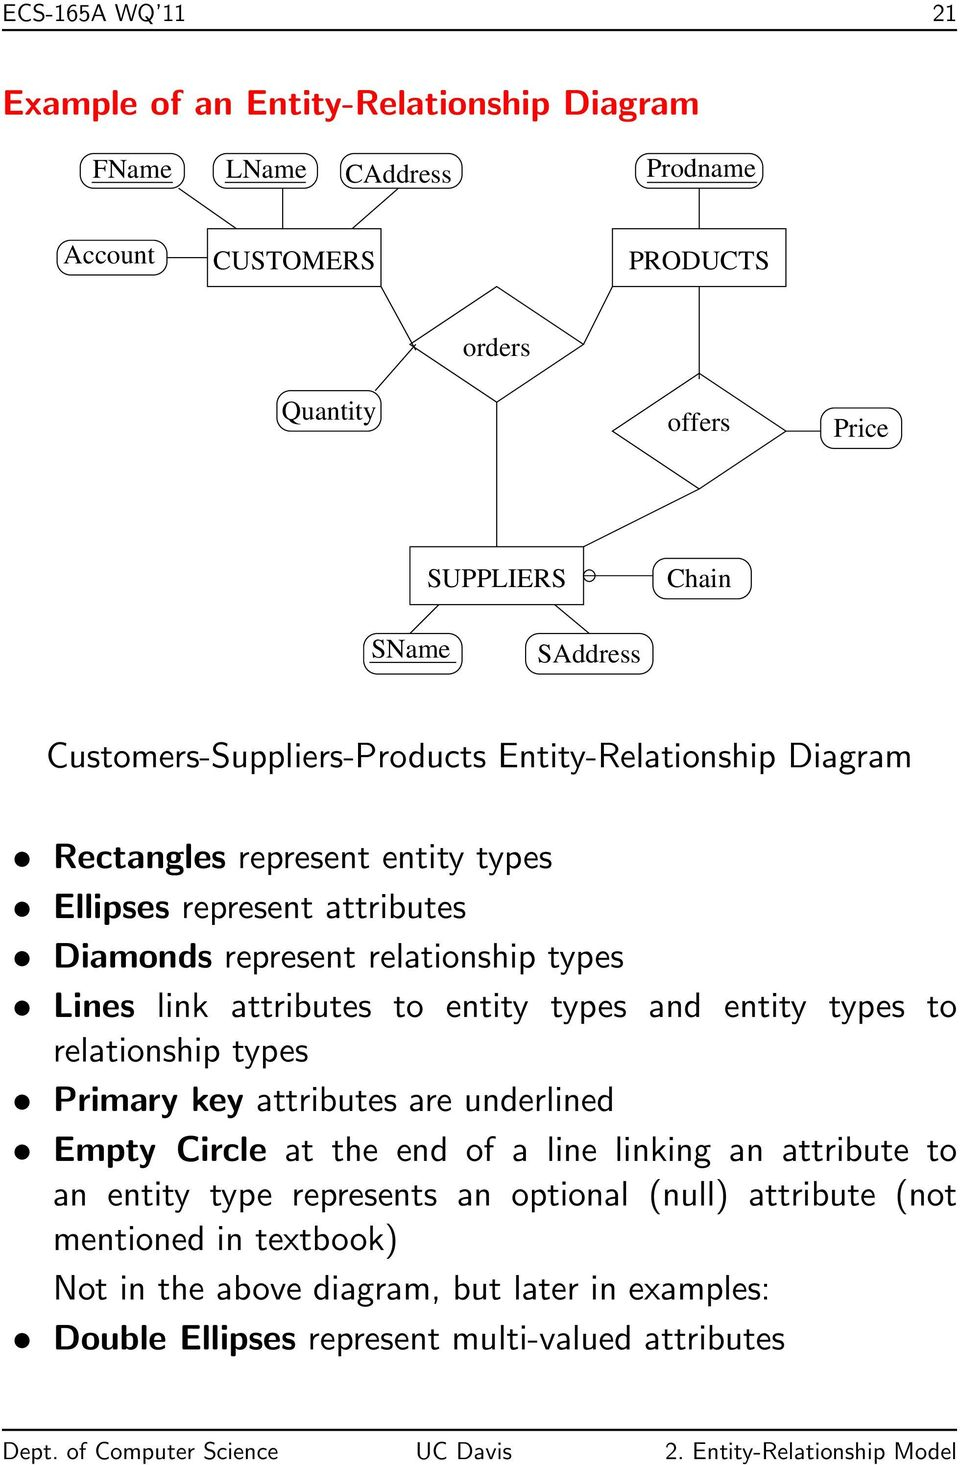 2. Conceptual Modeling Using The Entity-Relationship Model